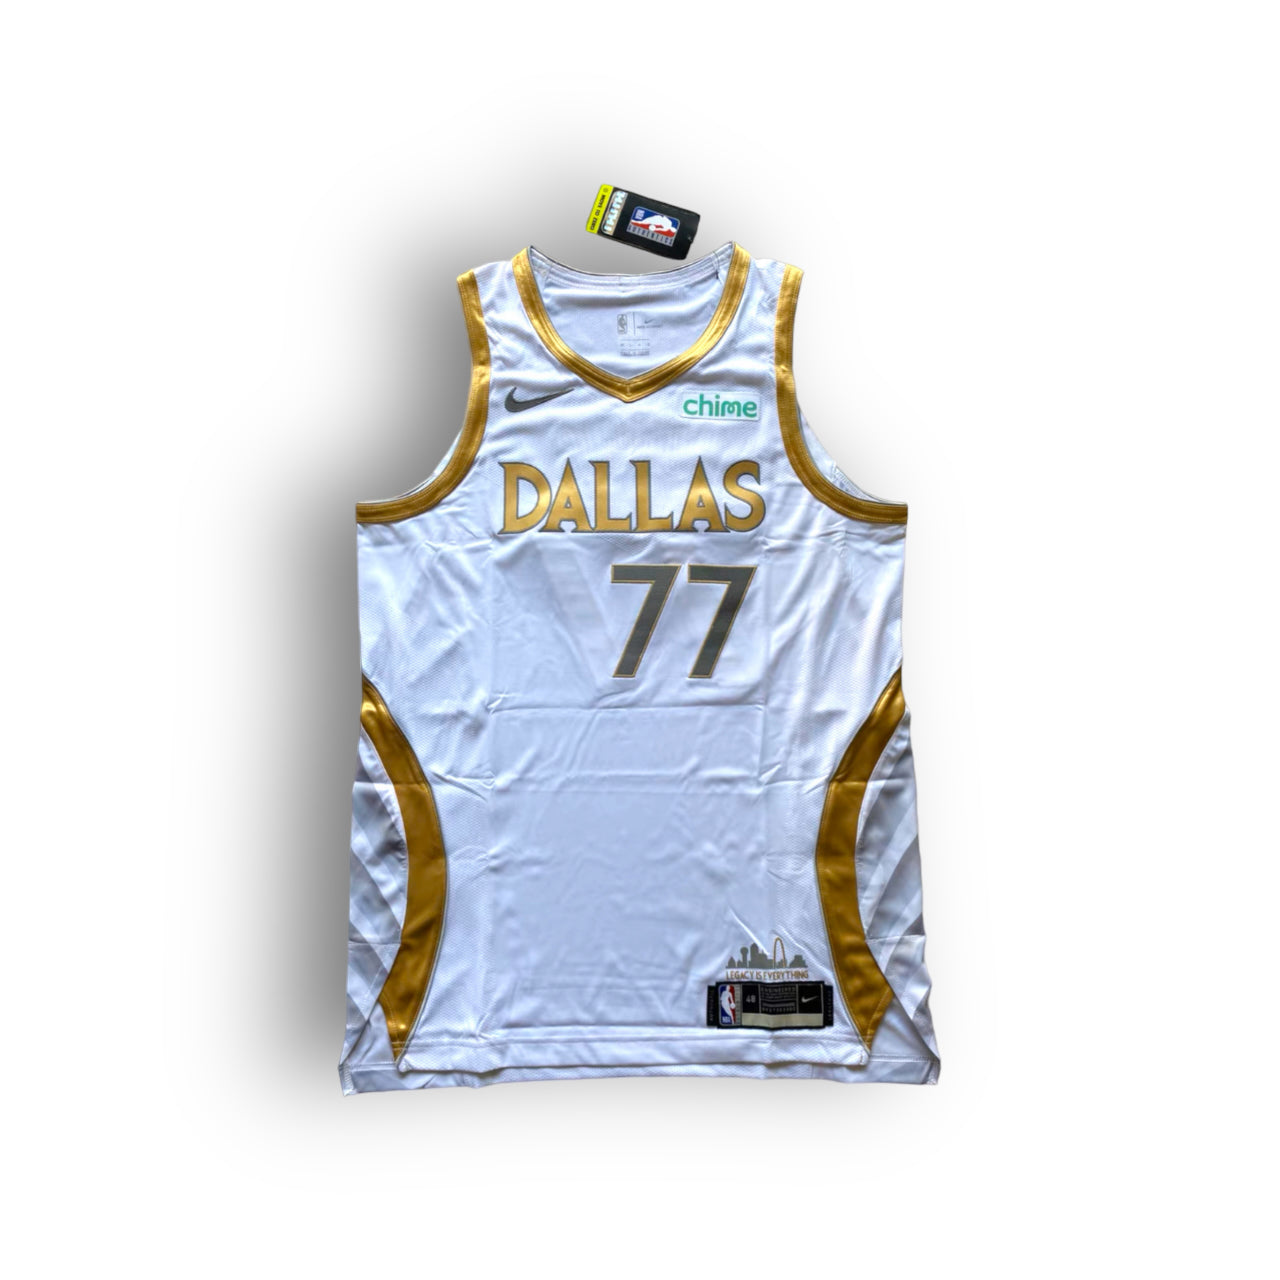 Luka Doncic Dallas Mavericks 2020-2021 City Edition Nike Authentic Jersey - White/Gold (with "Chime Patch") - Hoop Jersey Store